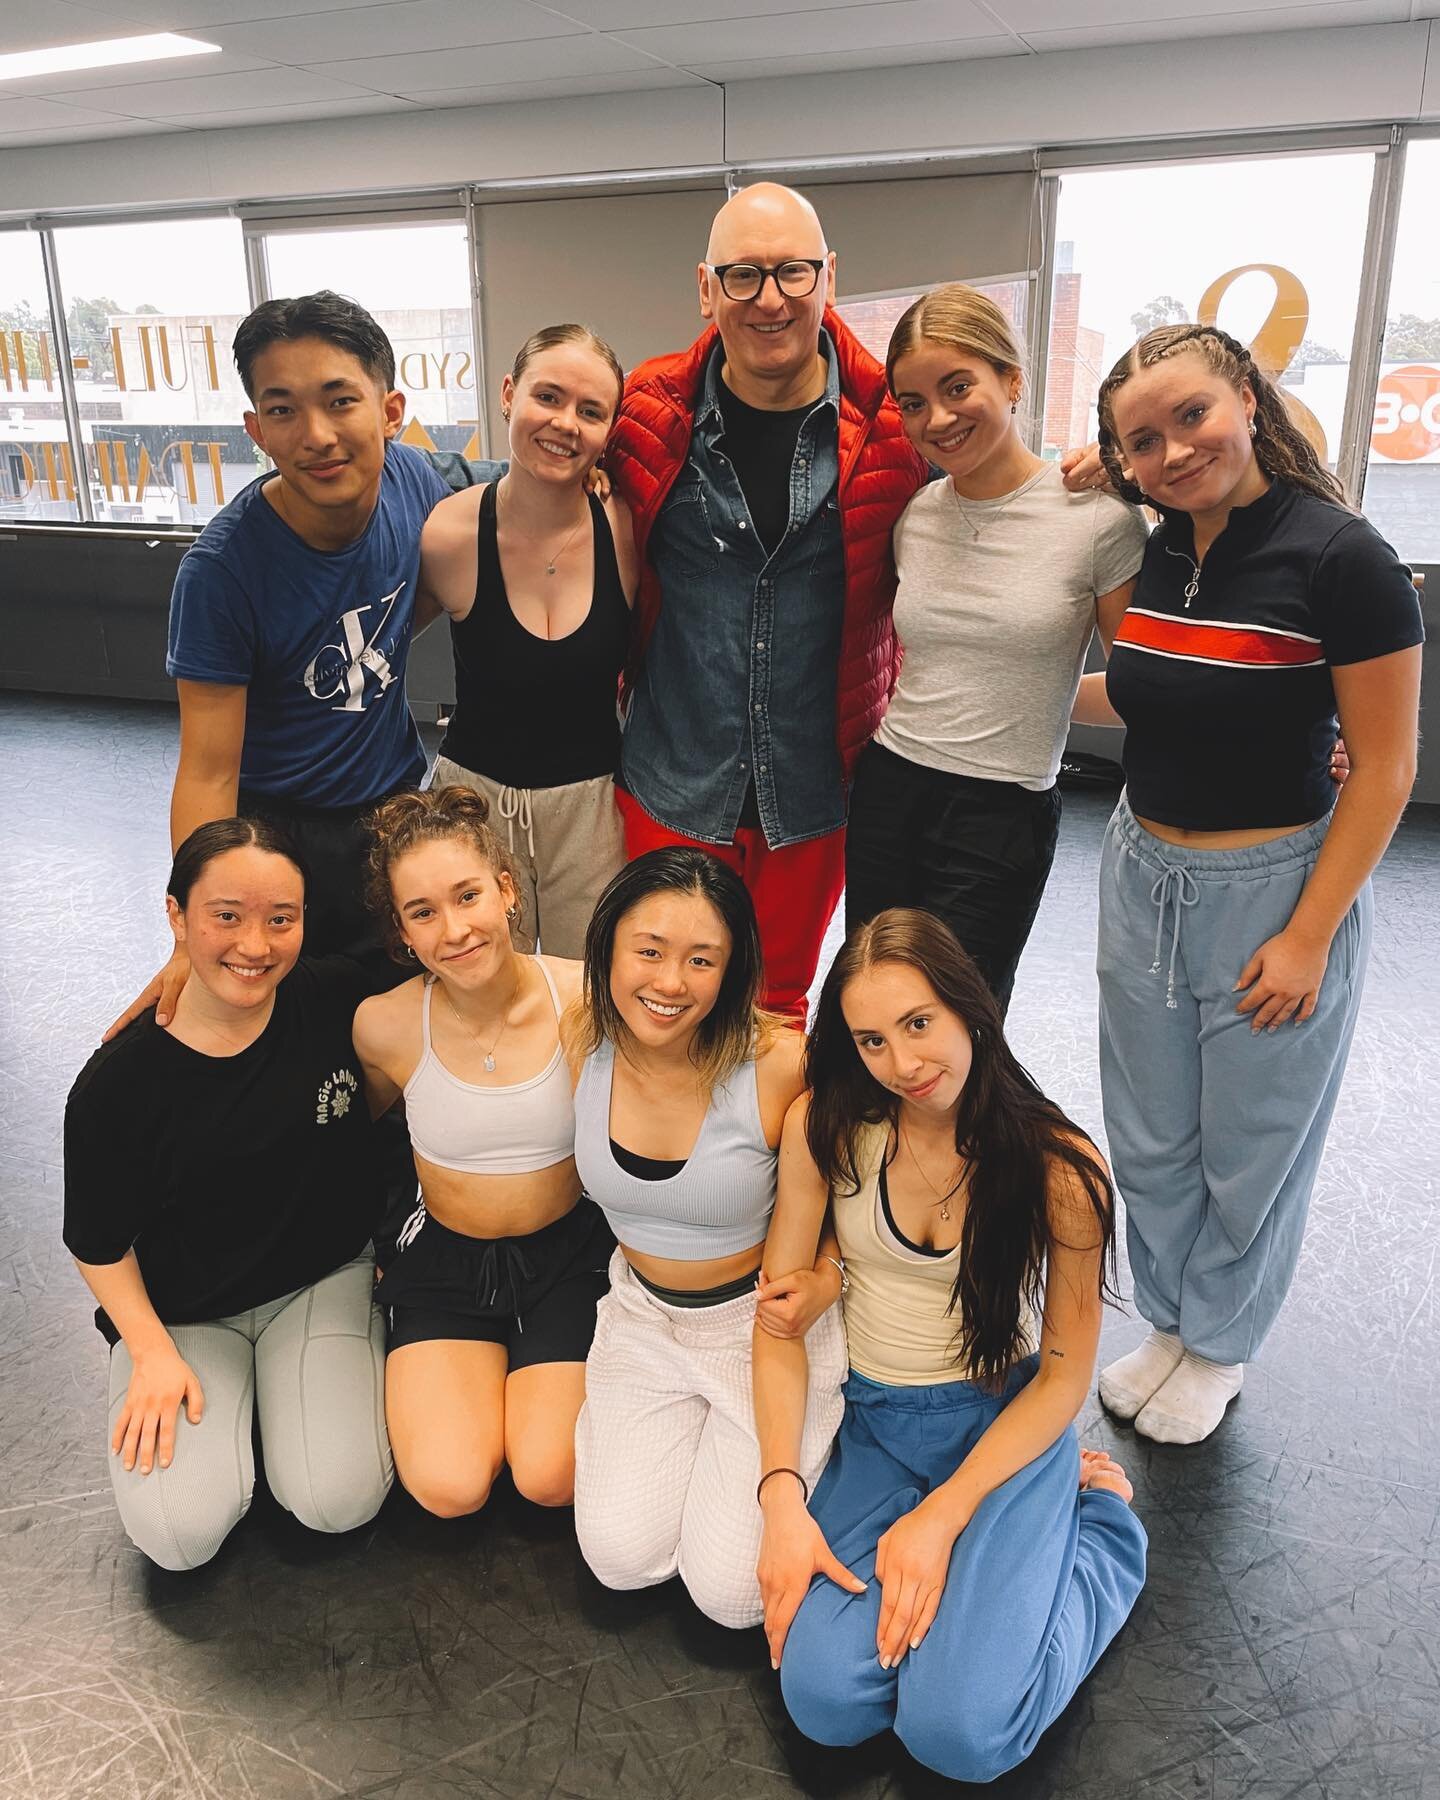 We are thrilled to be hosting @francescoventri this week, founder of @sydney_choreographic_centre.
Francesco is in the process of putting together an original work on a select group of students, an incredible opportunity we are excited to facilitate!